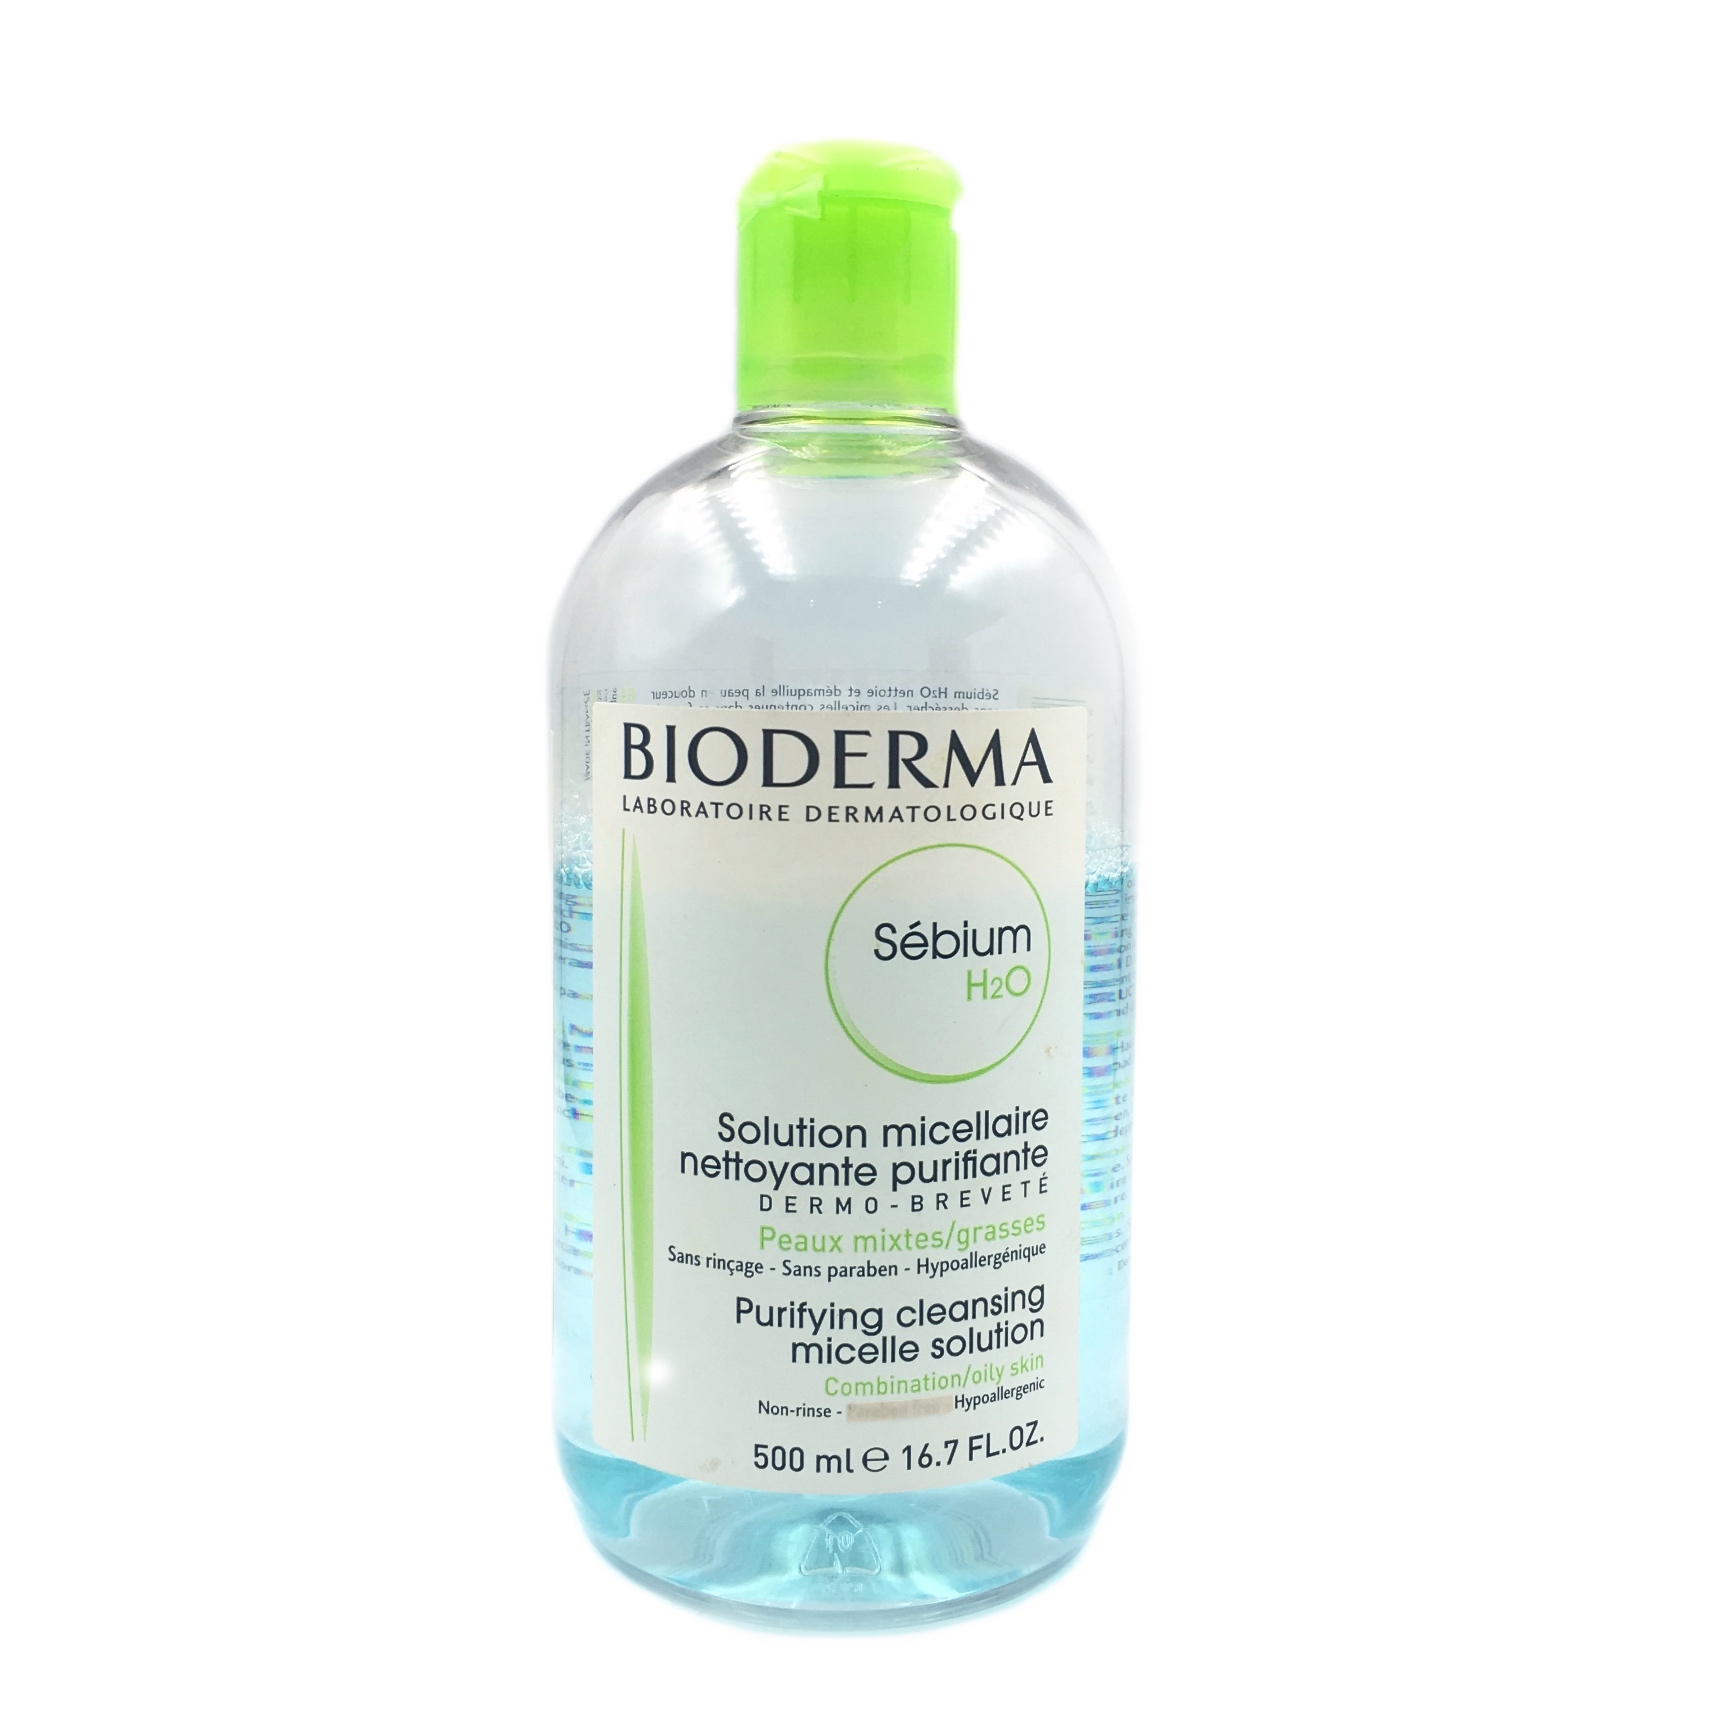 Bioderma Sebium H2O Purifying Cleansing Micelle Solution Faces